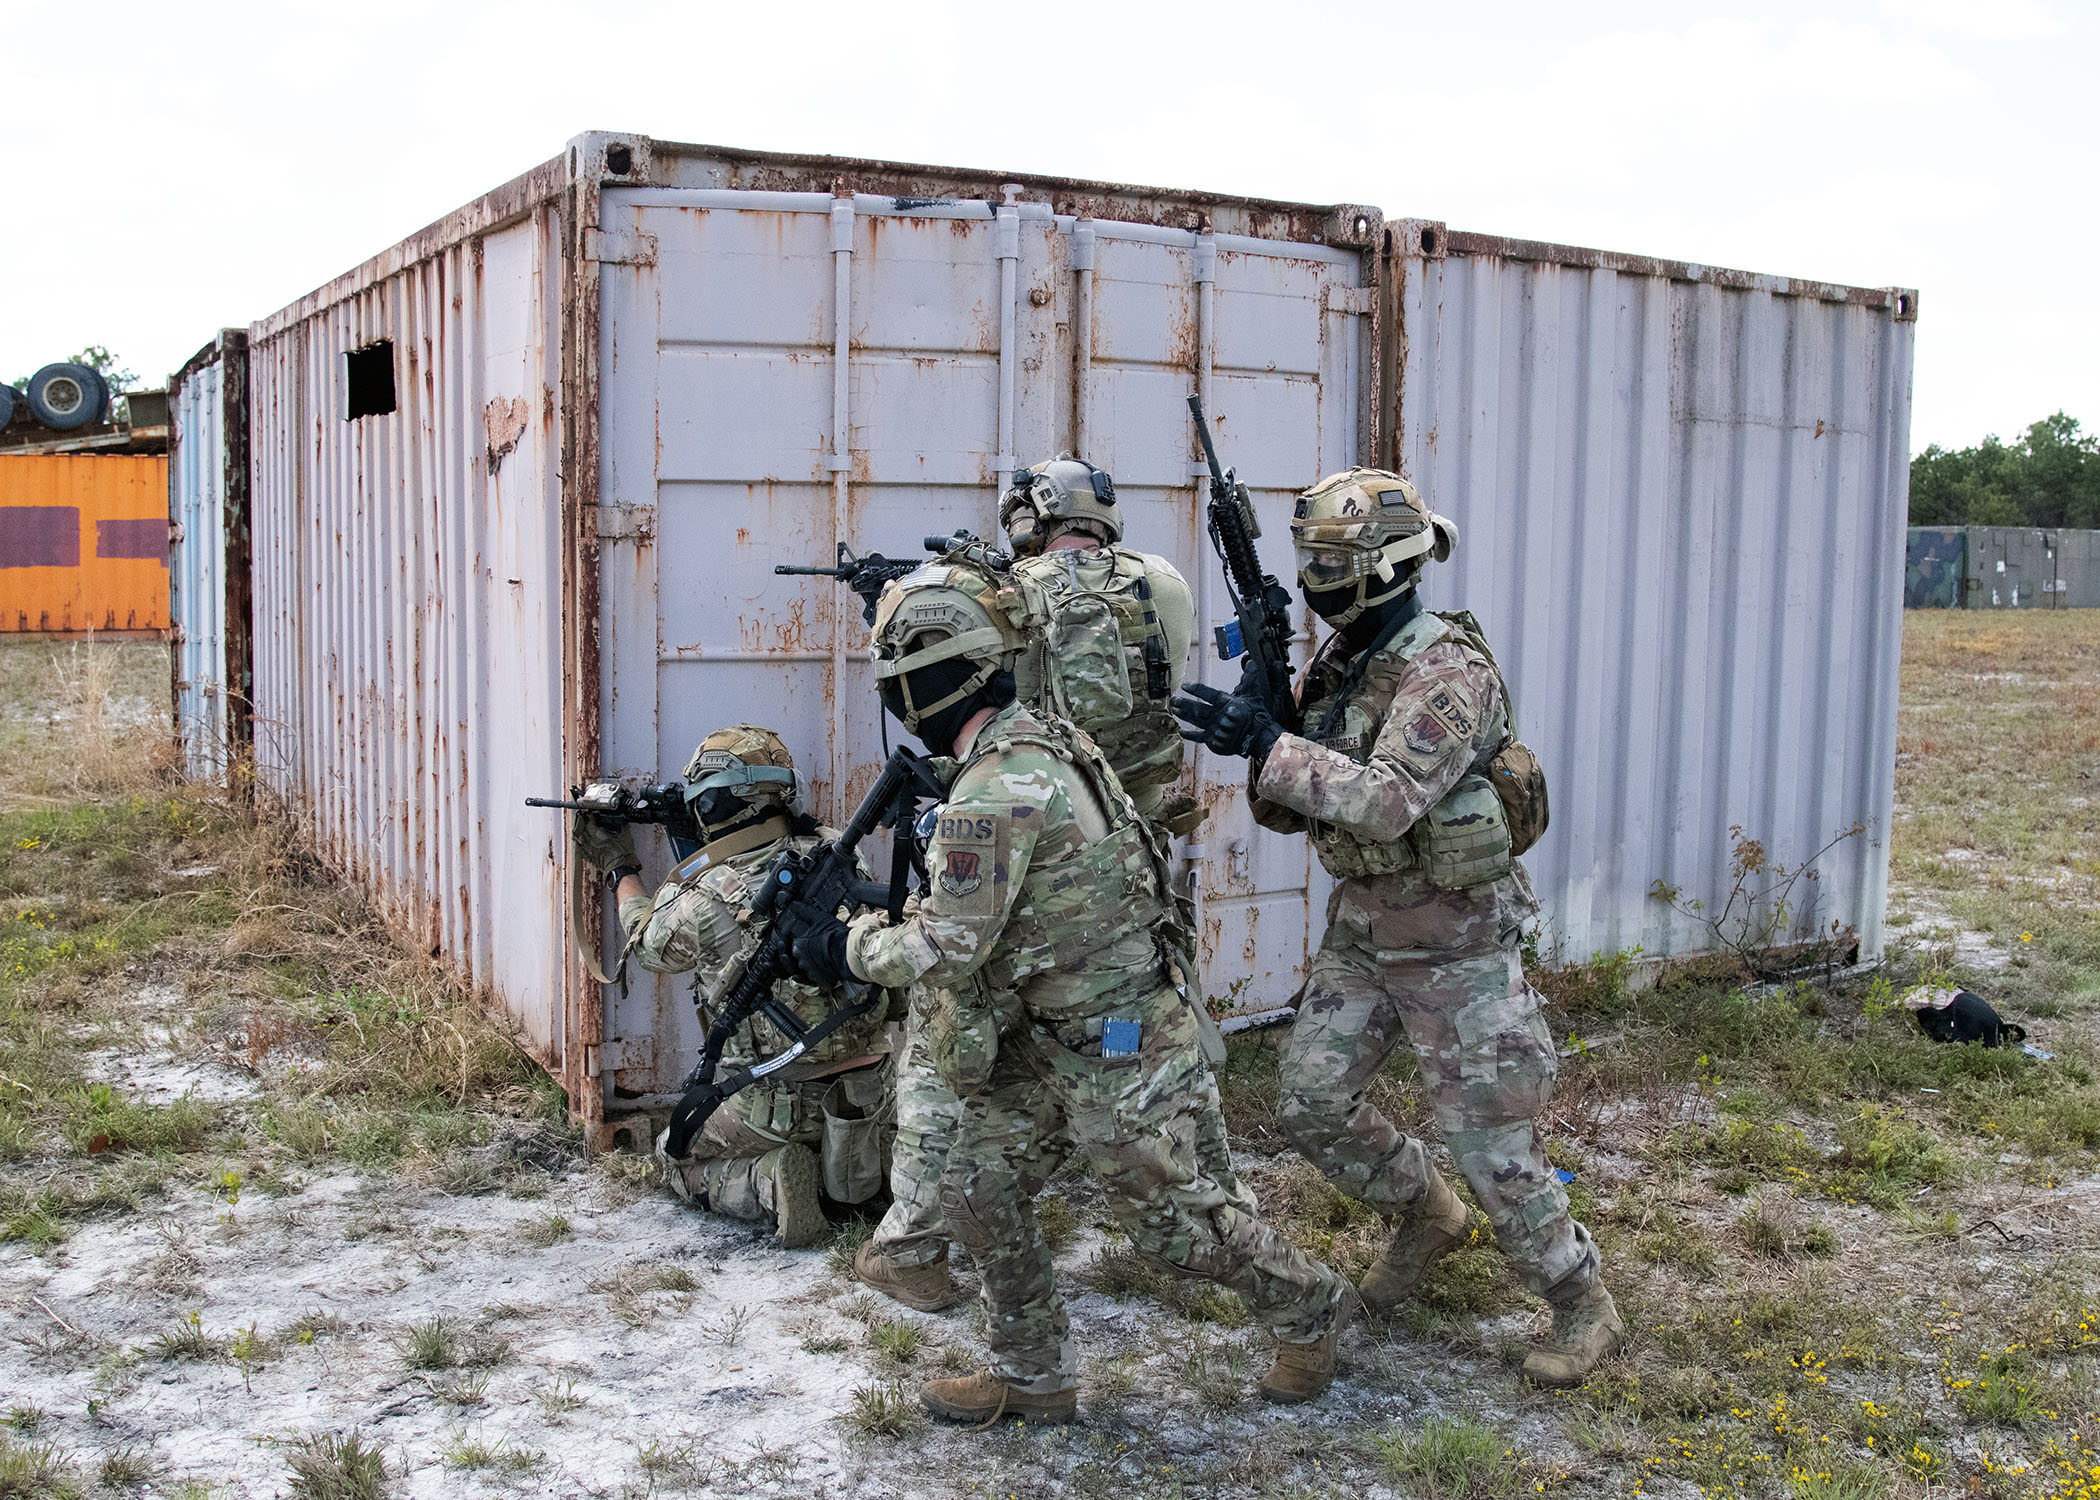 Airmen from the 105th Base Defense Squadron conduct a ground assault during a training exercise at Warren Grove Bombing Range, Ocean County